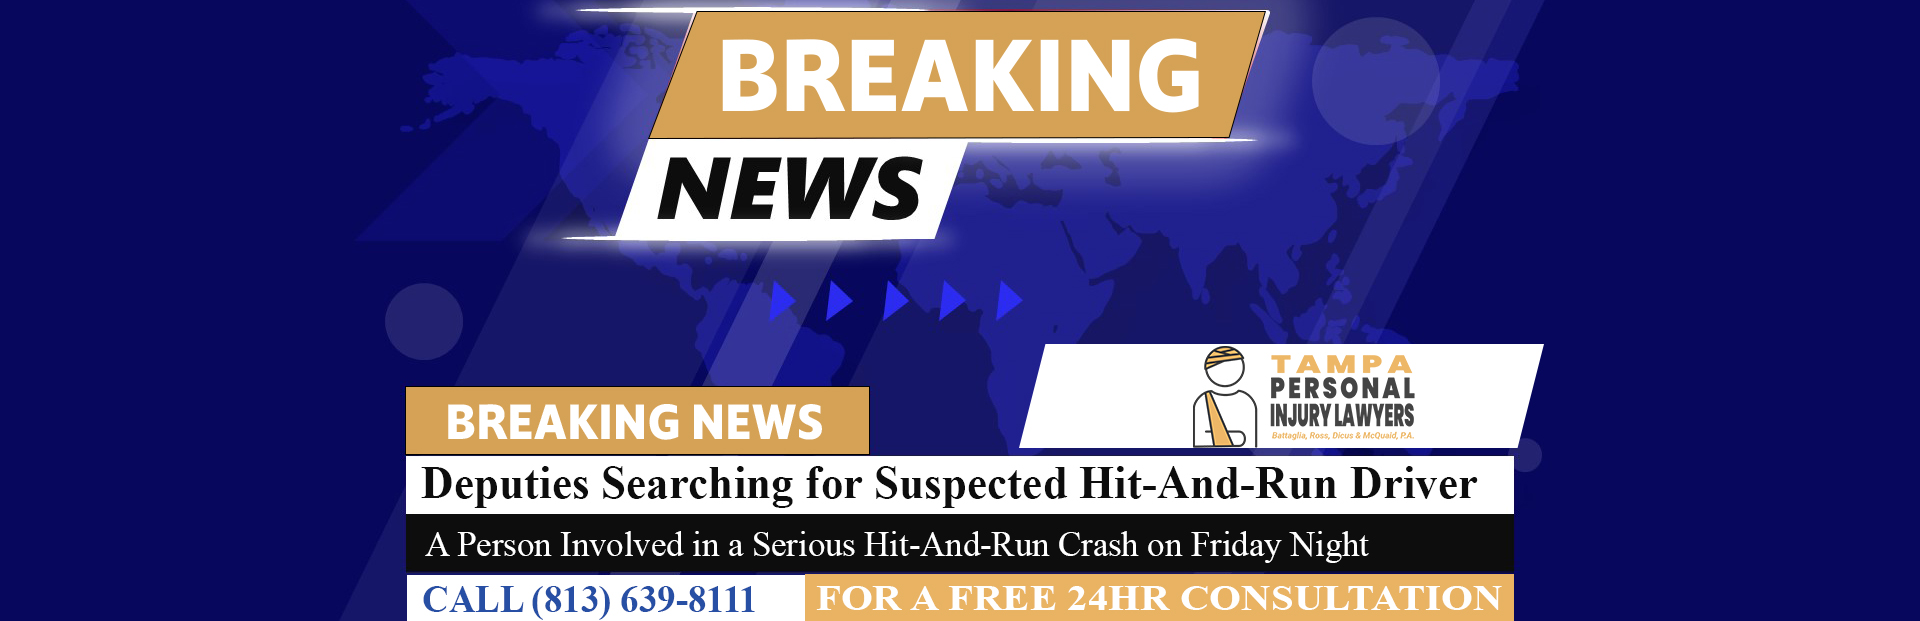 [05-20-24] Hillsborough County Deputies Searching for Suspected Hit-And-Run Driver